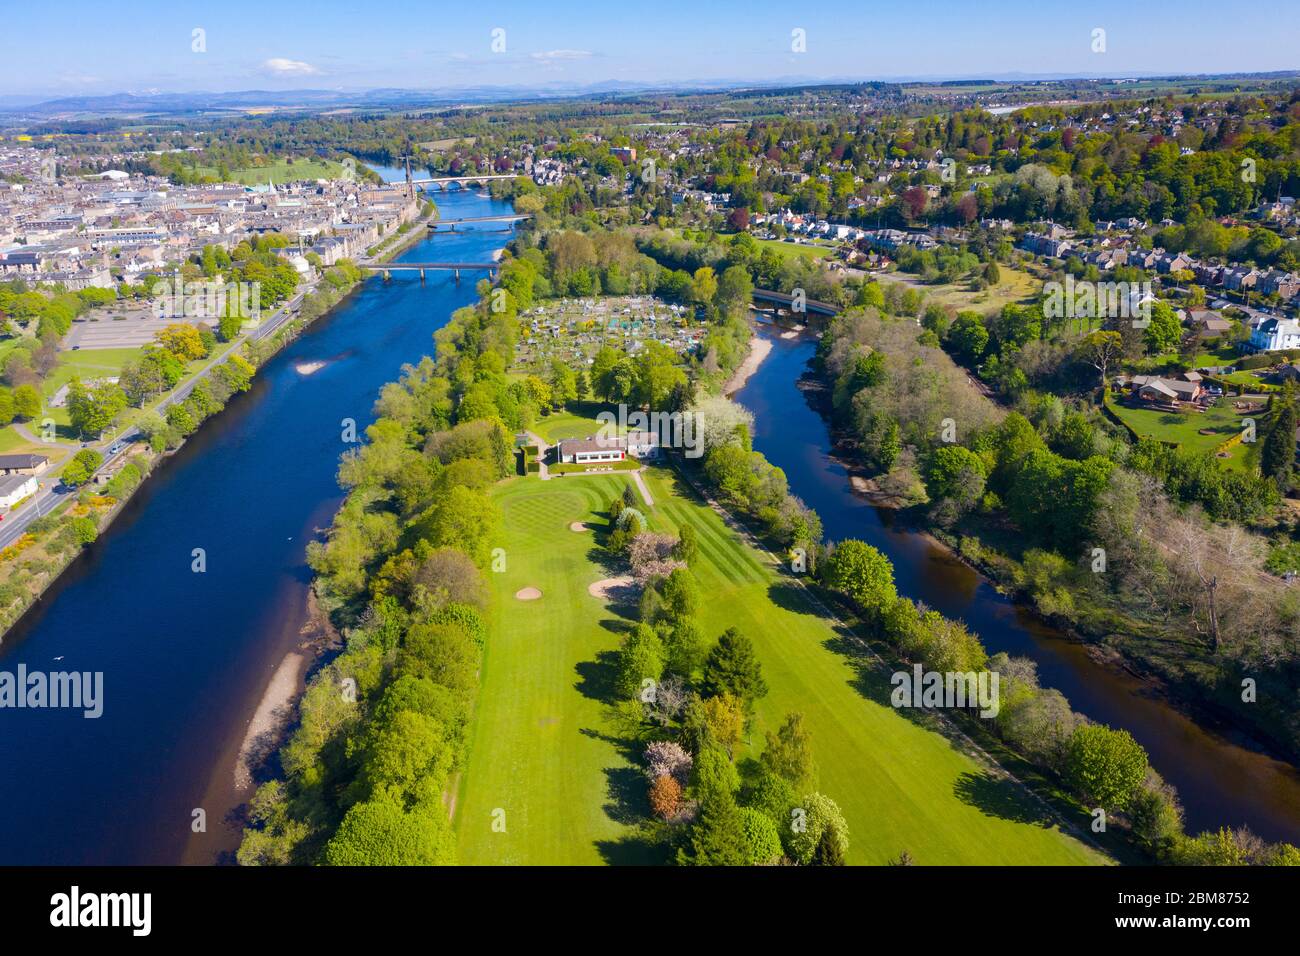 Aerial view of King James VI Golf Club golf course closed during Covid-19 lockdown, on Moncreiffe Island in River Tay, Perth, Scotland, UK Stock Photo